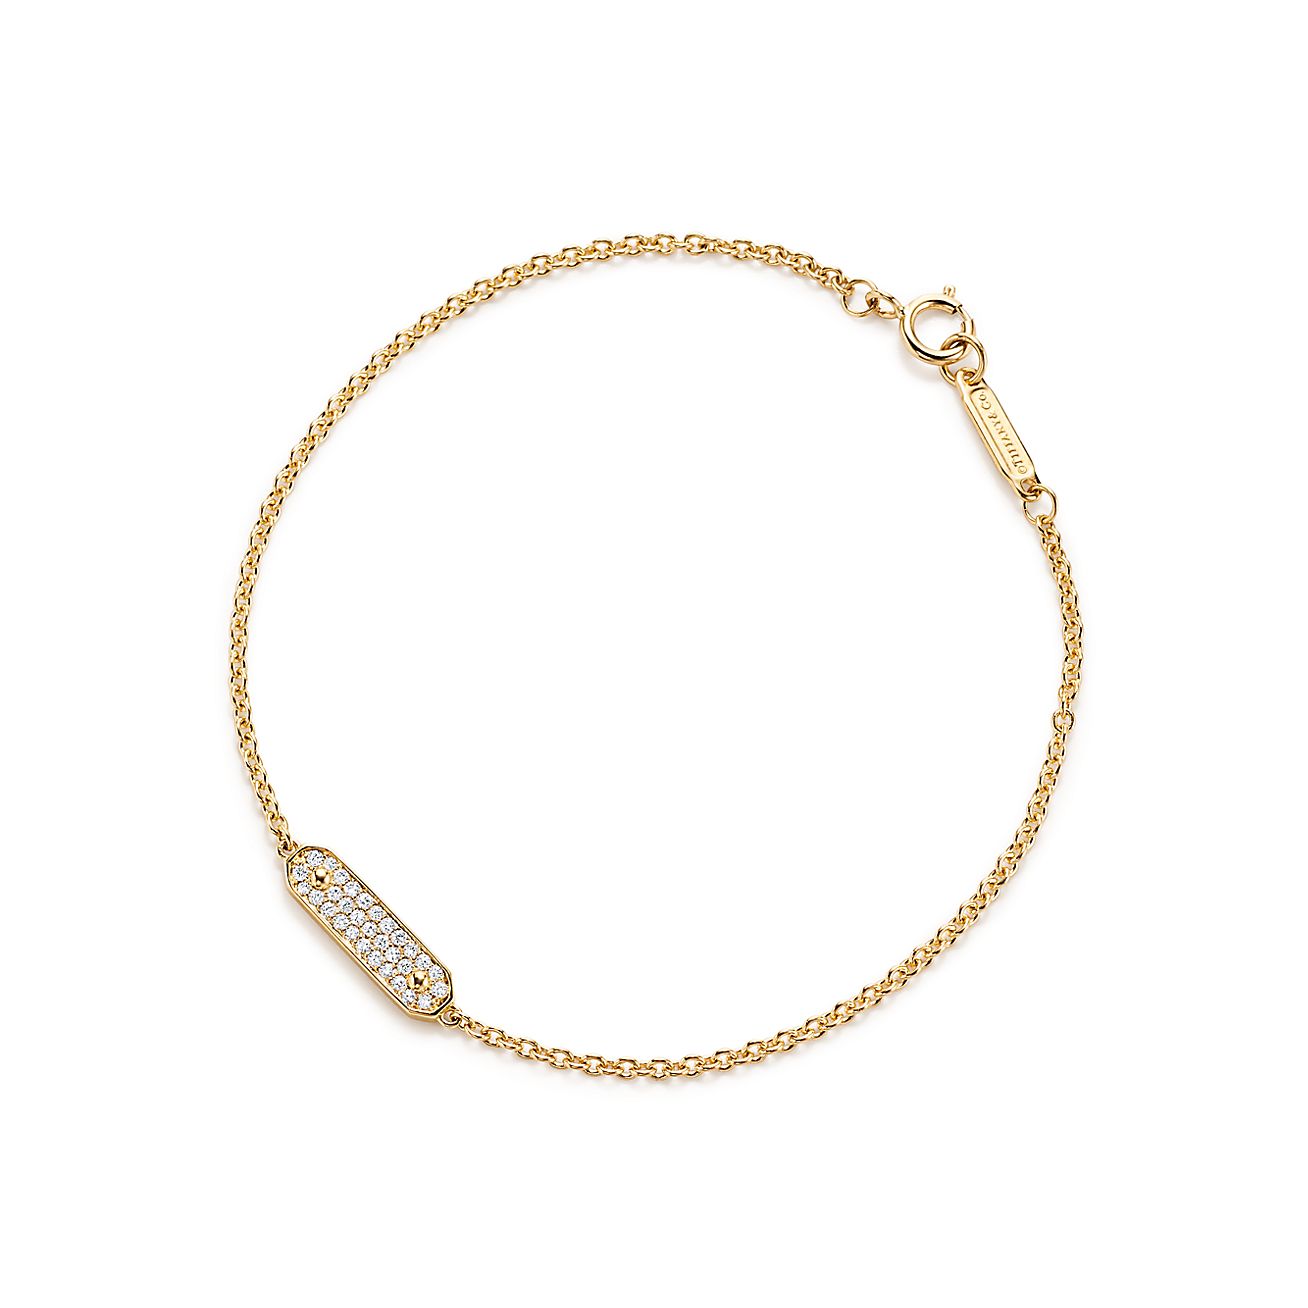 Tag chain bracelet in 18k gold with 